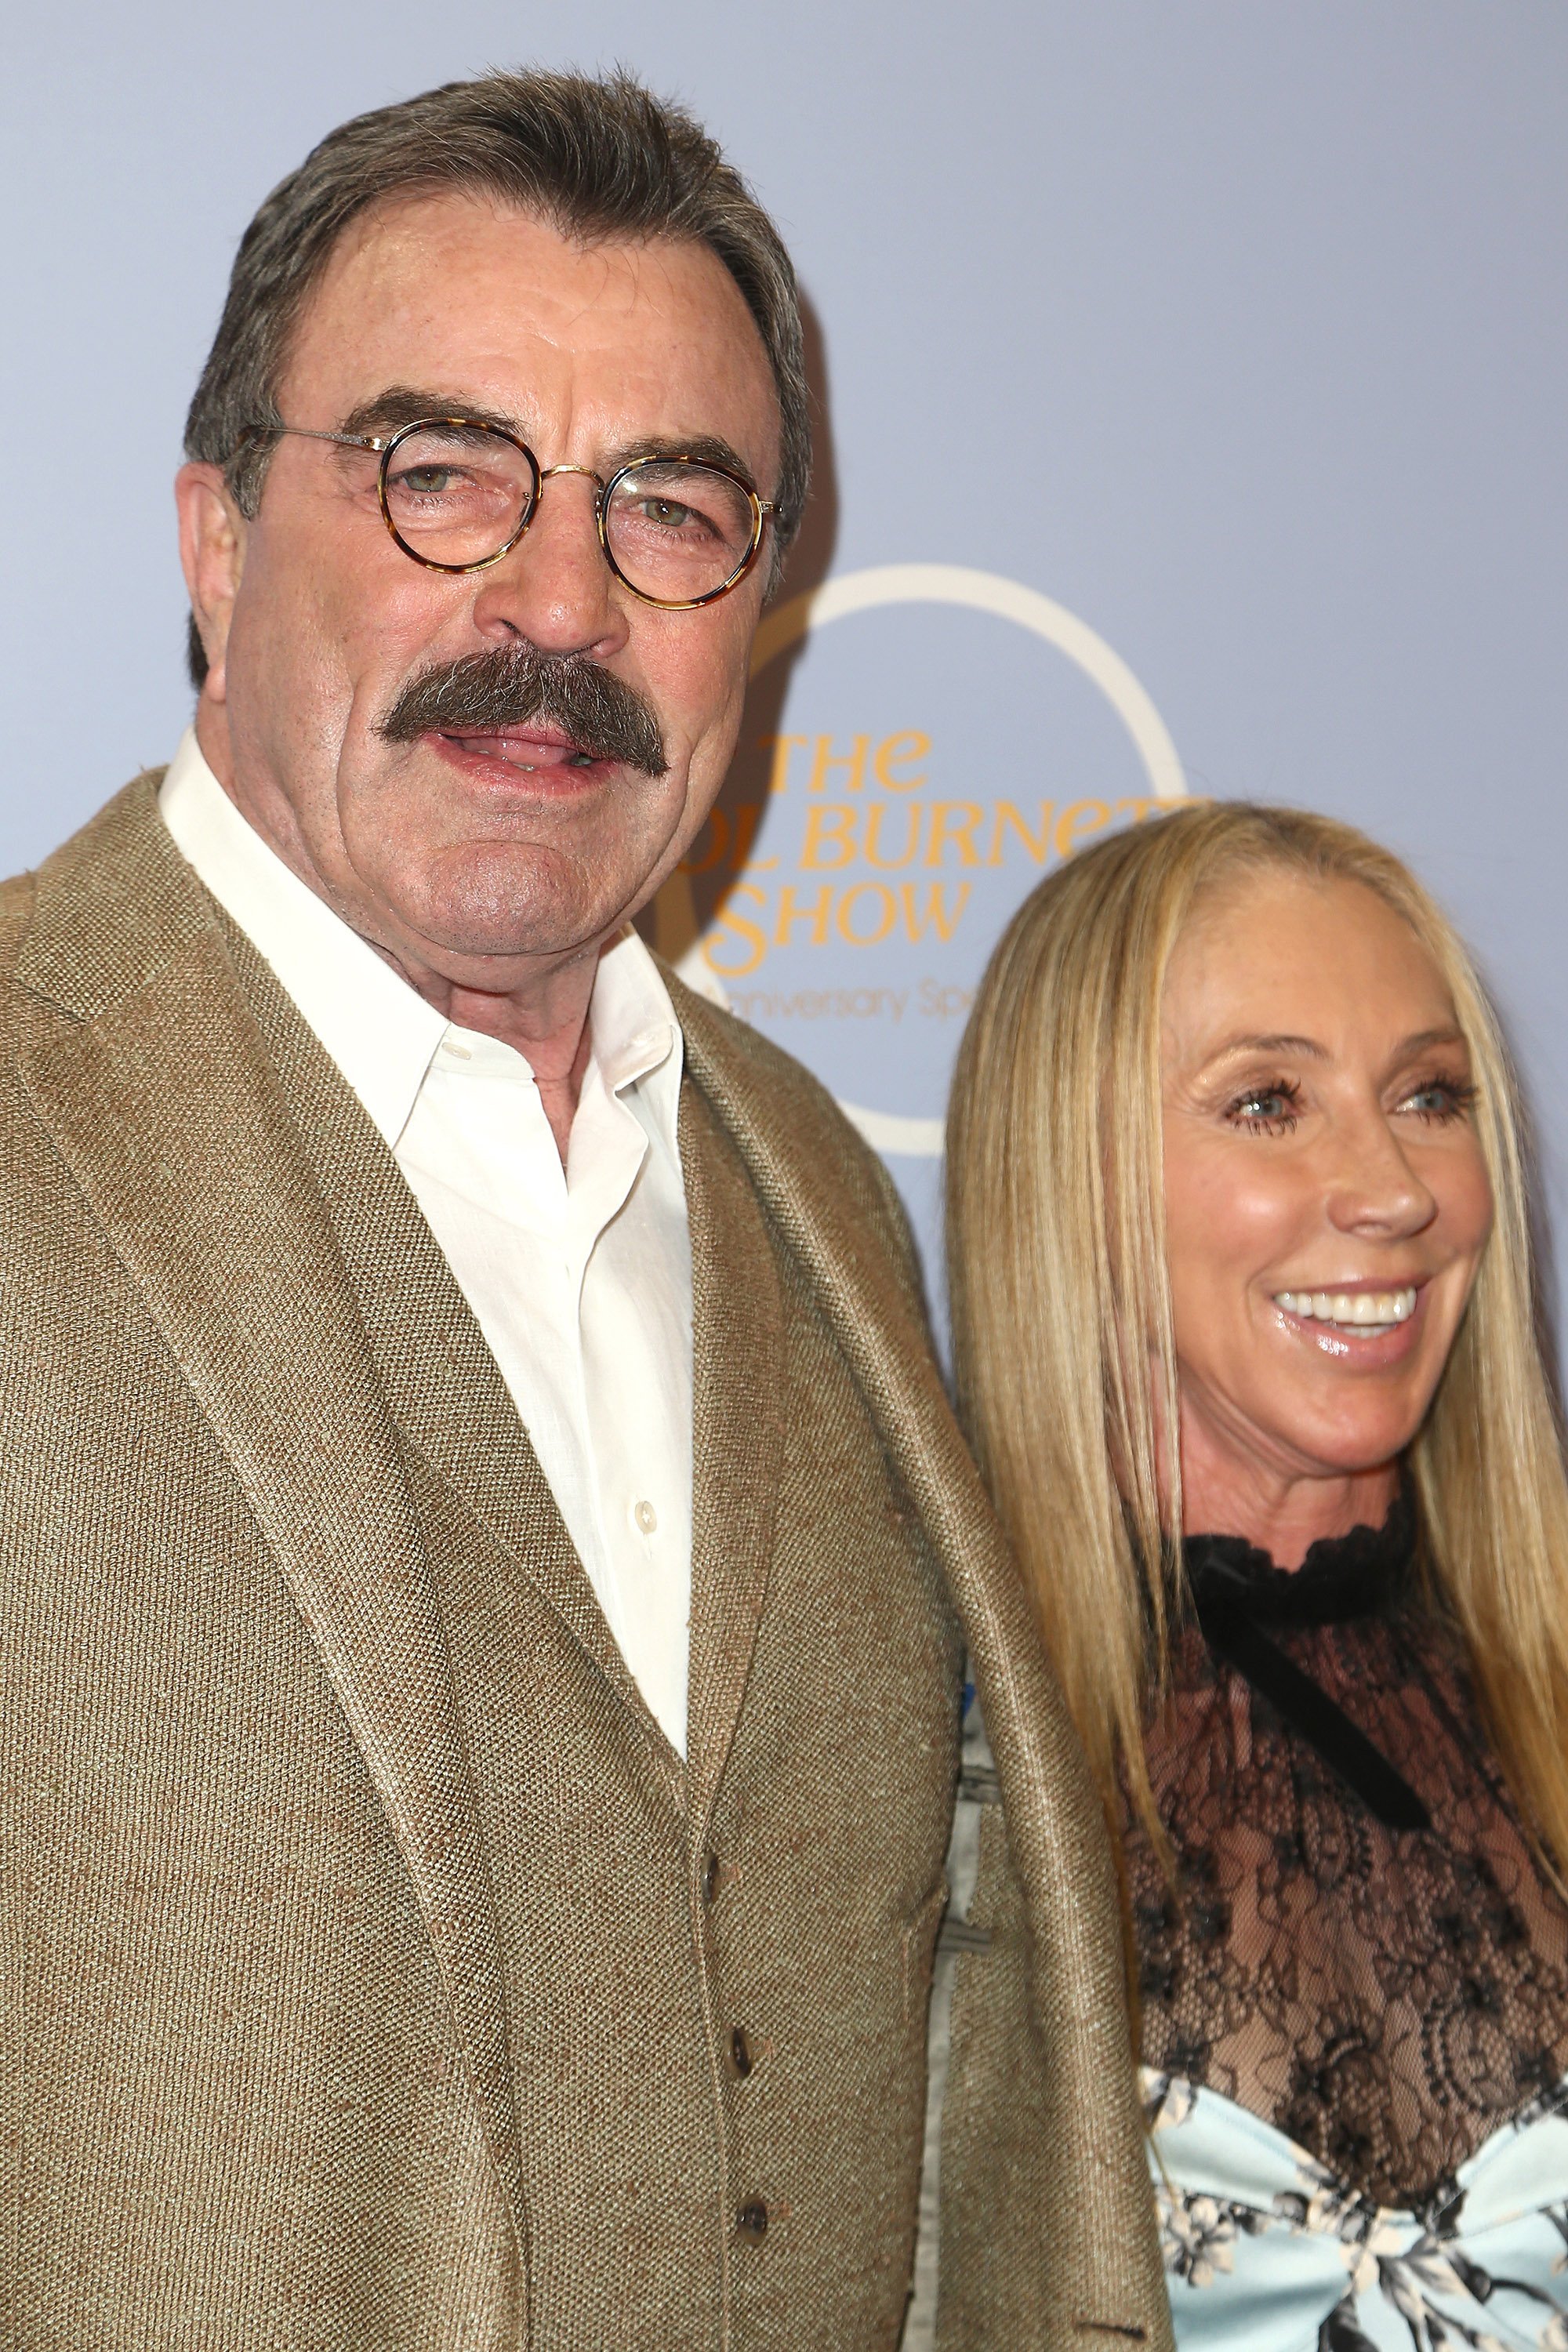 Tom Selleck and his wife Jillie Mack in Los Angeles 2017. | Source: Getty Images 